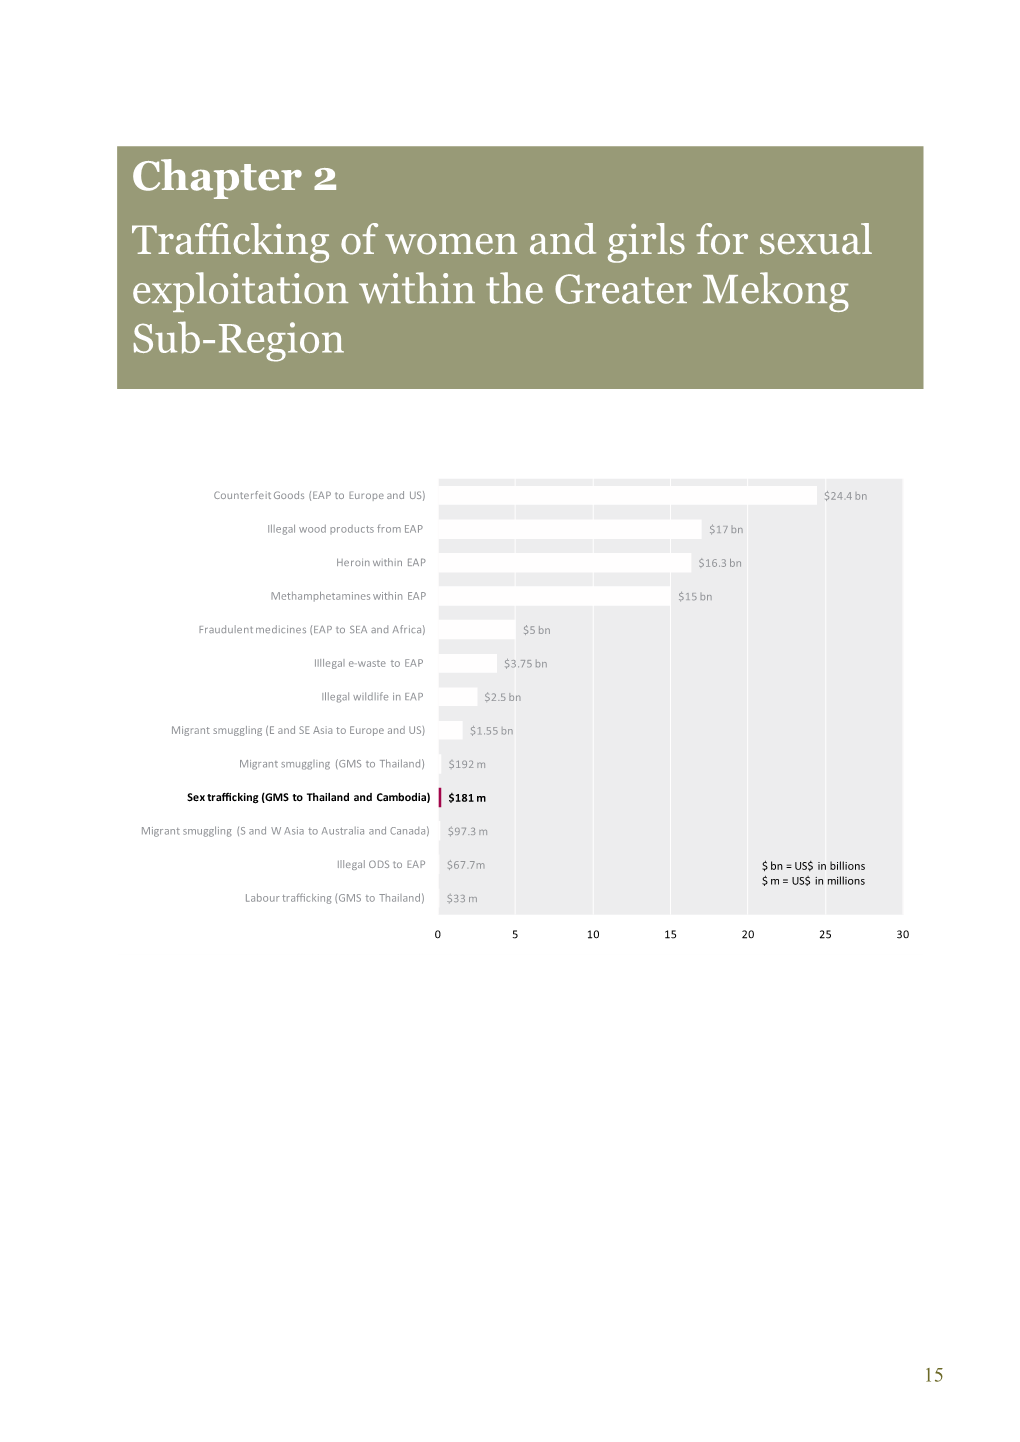 For More, See 'Trafficking of Women and Girls for Sexual Exploitation